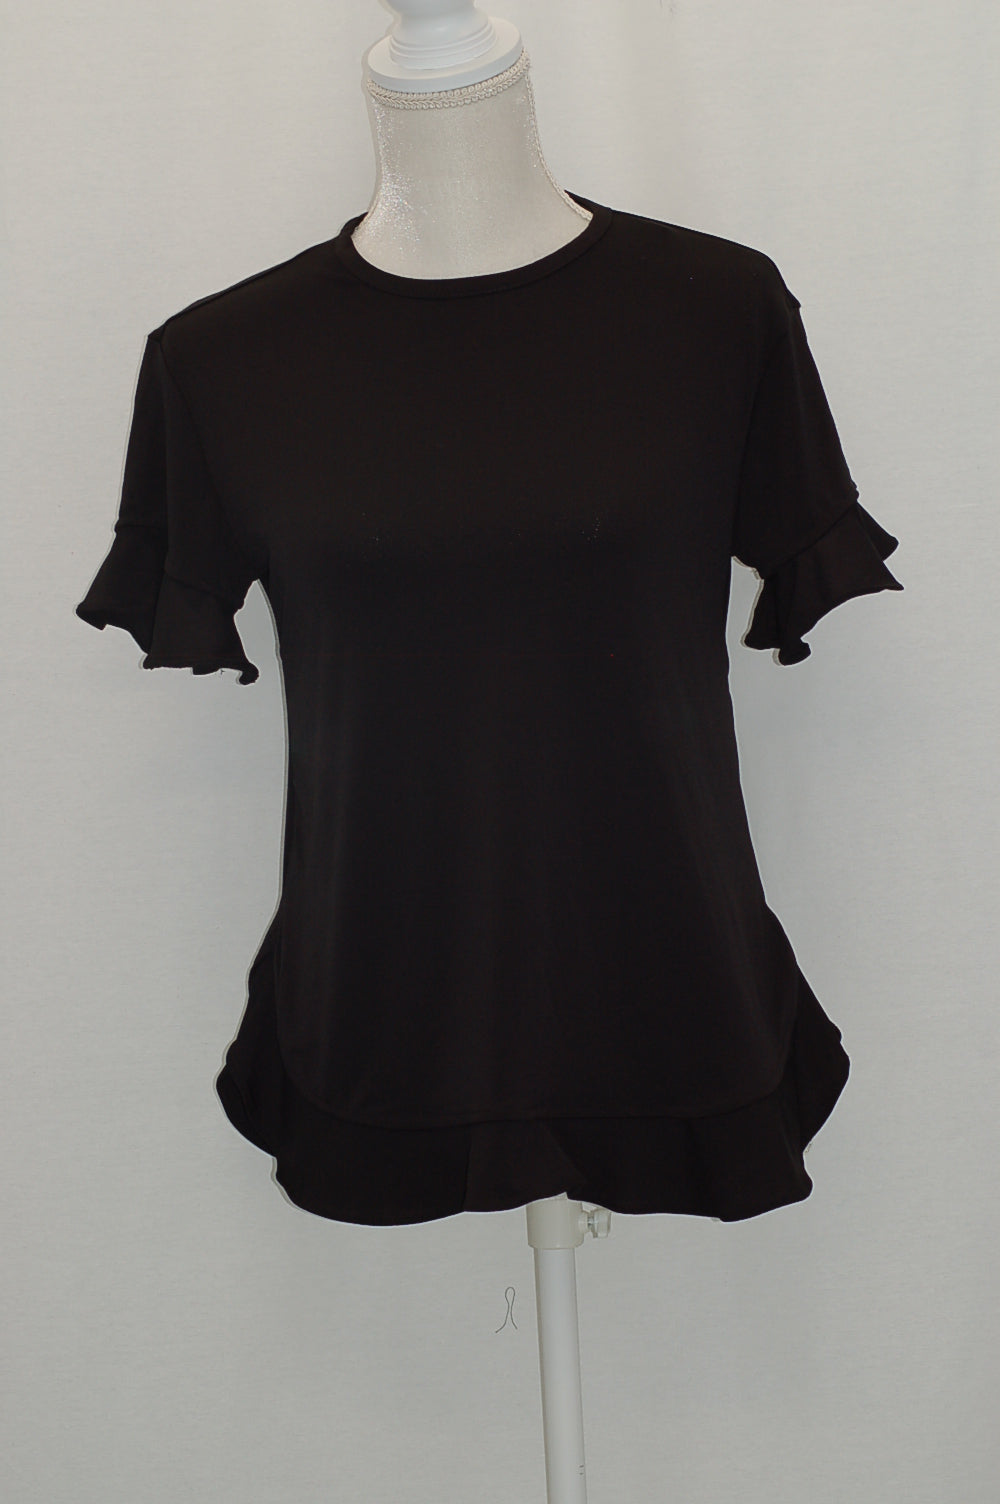 Cable Gauge Ruffled Top Black XS